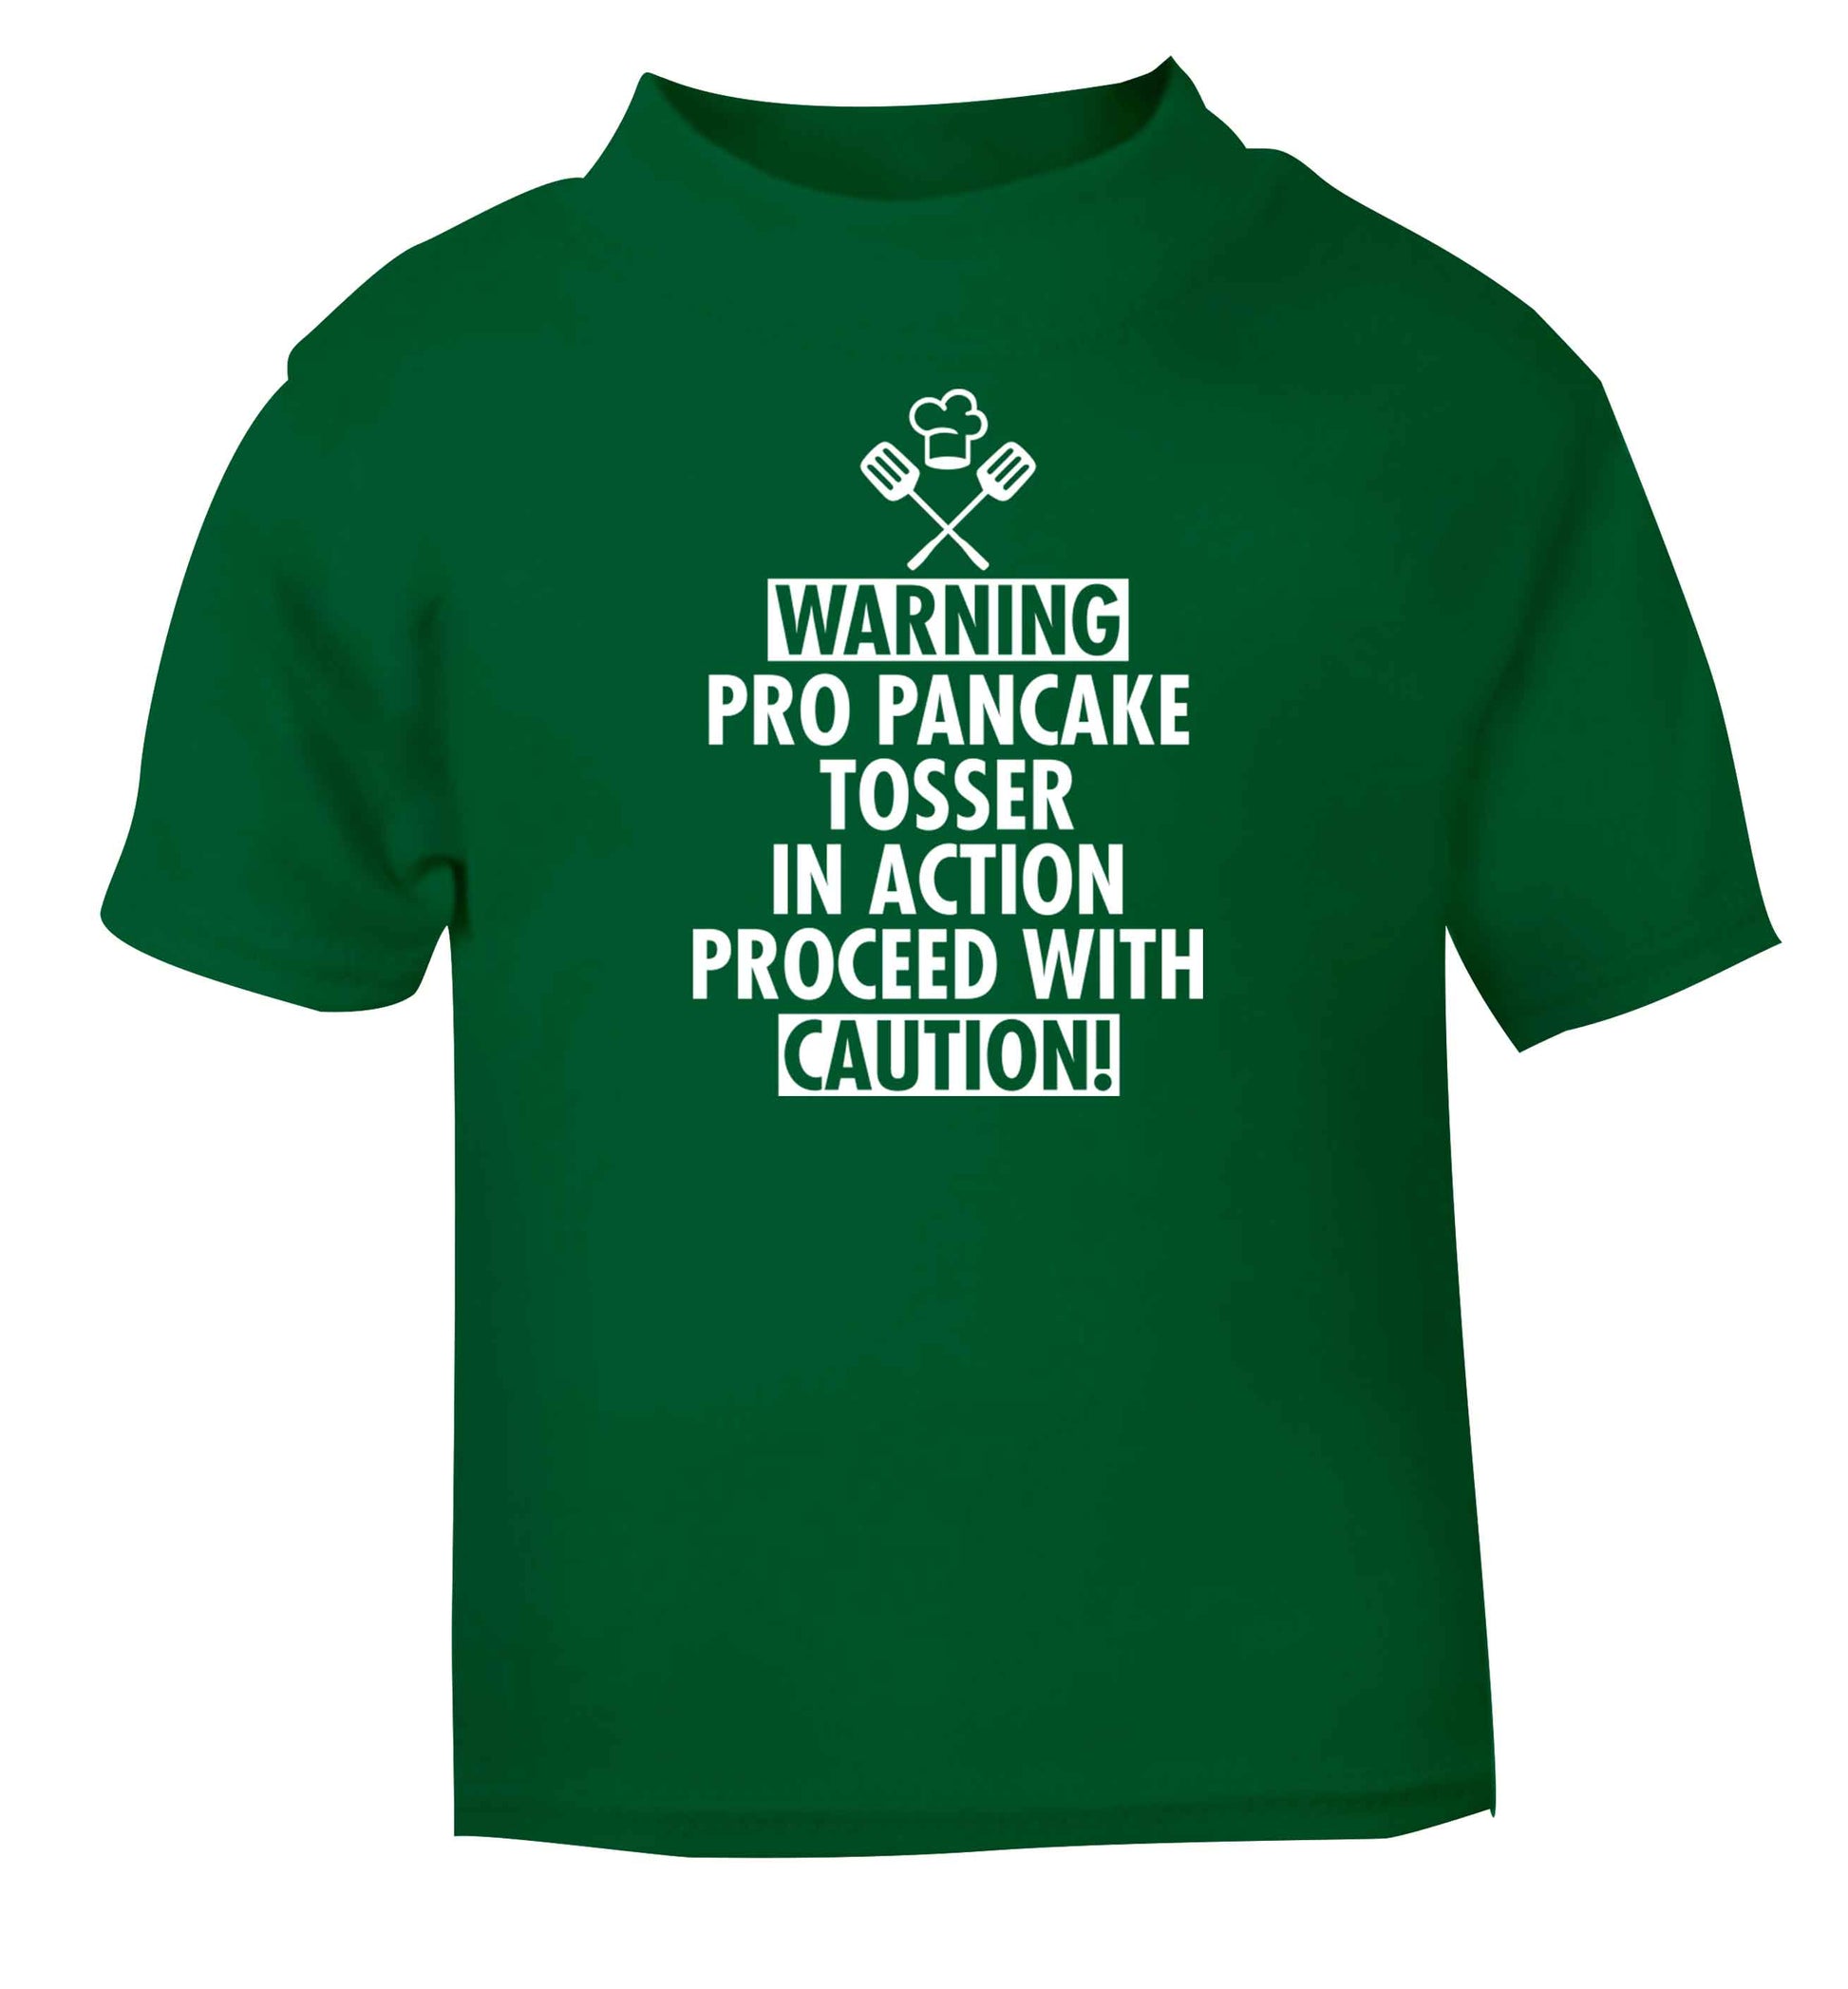 Warning pro pancake tosser in action proceed with caution green baby toddler Tshirt 2 Years